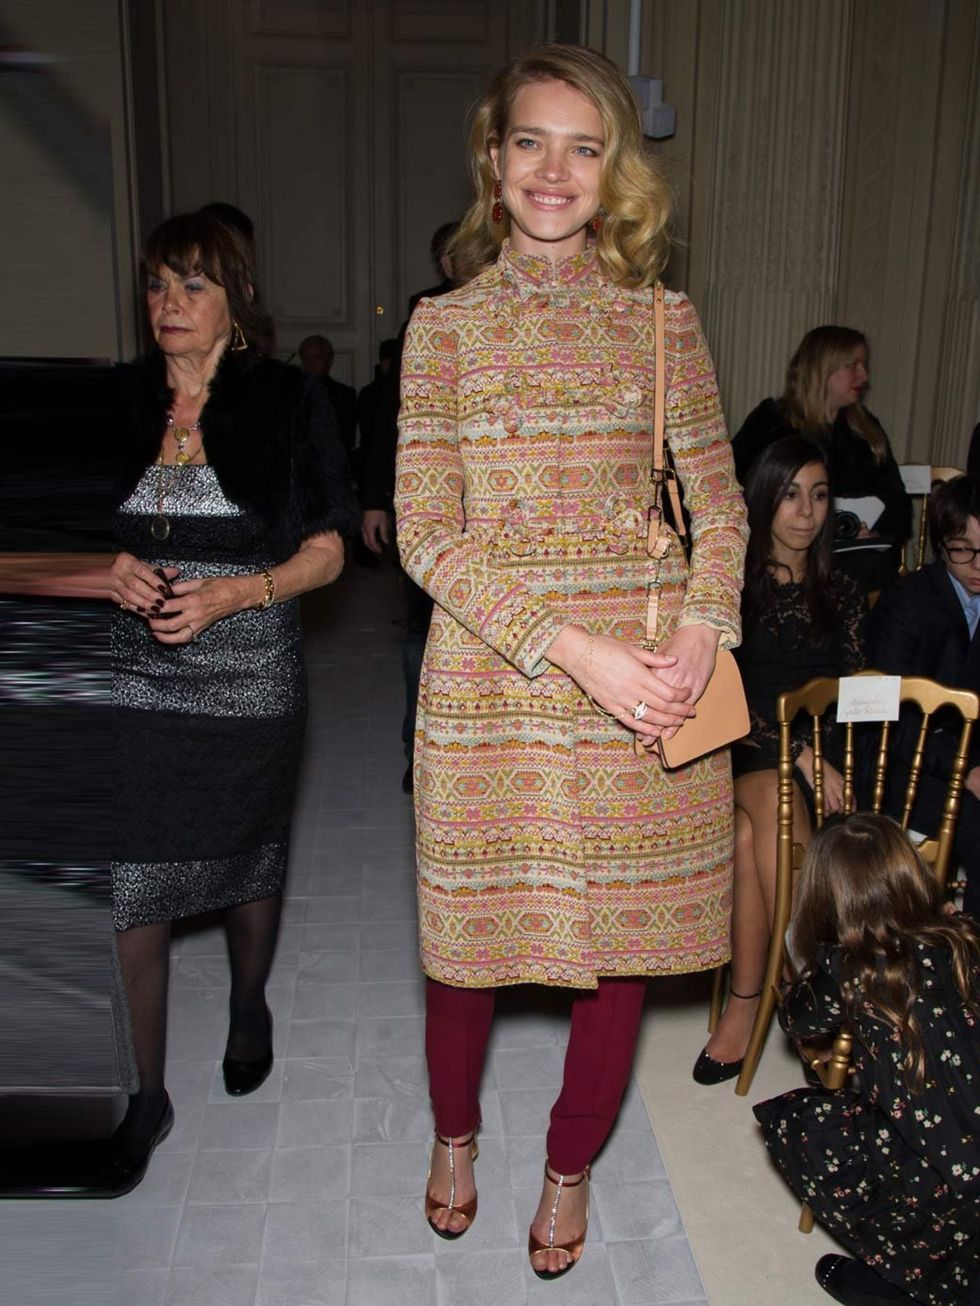 <p><a href="http://www.elleuk.com/star-style/celebrity-style-files/natalia-vodianova">Natalia Vodianova</a> attends the <a href="http://www.elleuk.com/catwalk/designer-a-z/valentino/couture-ss-2013/collection">Valentino Couture Spring Summer 13</a> show i